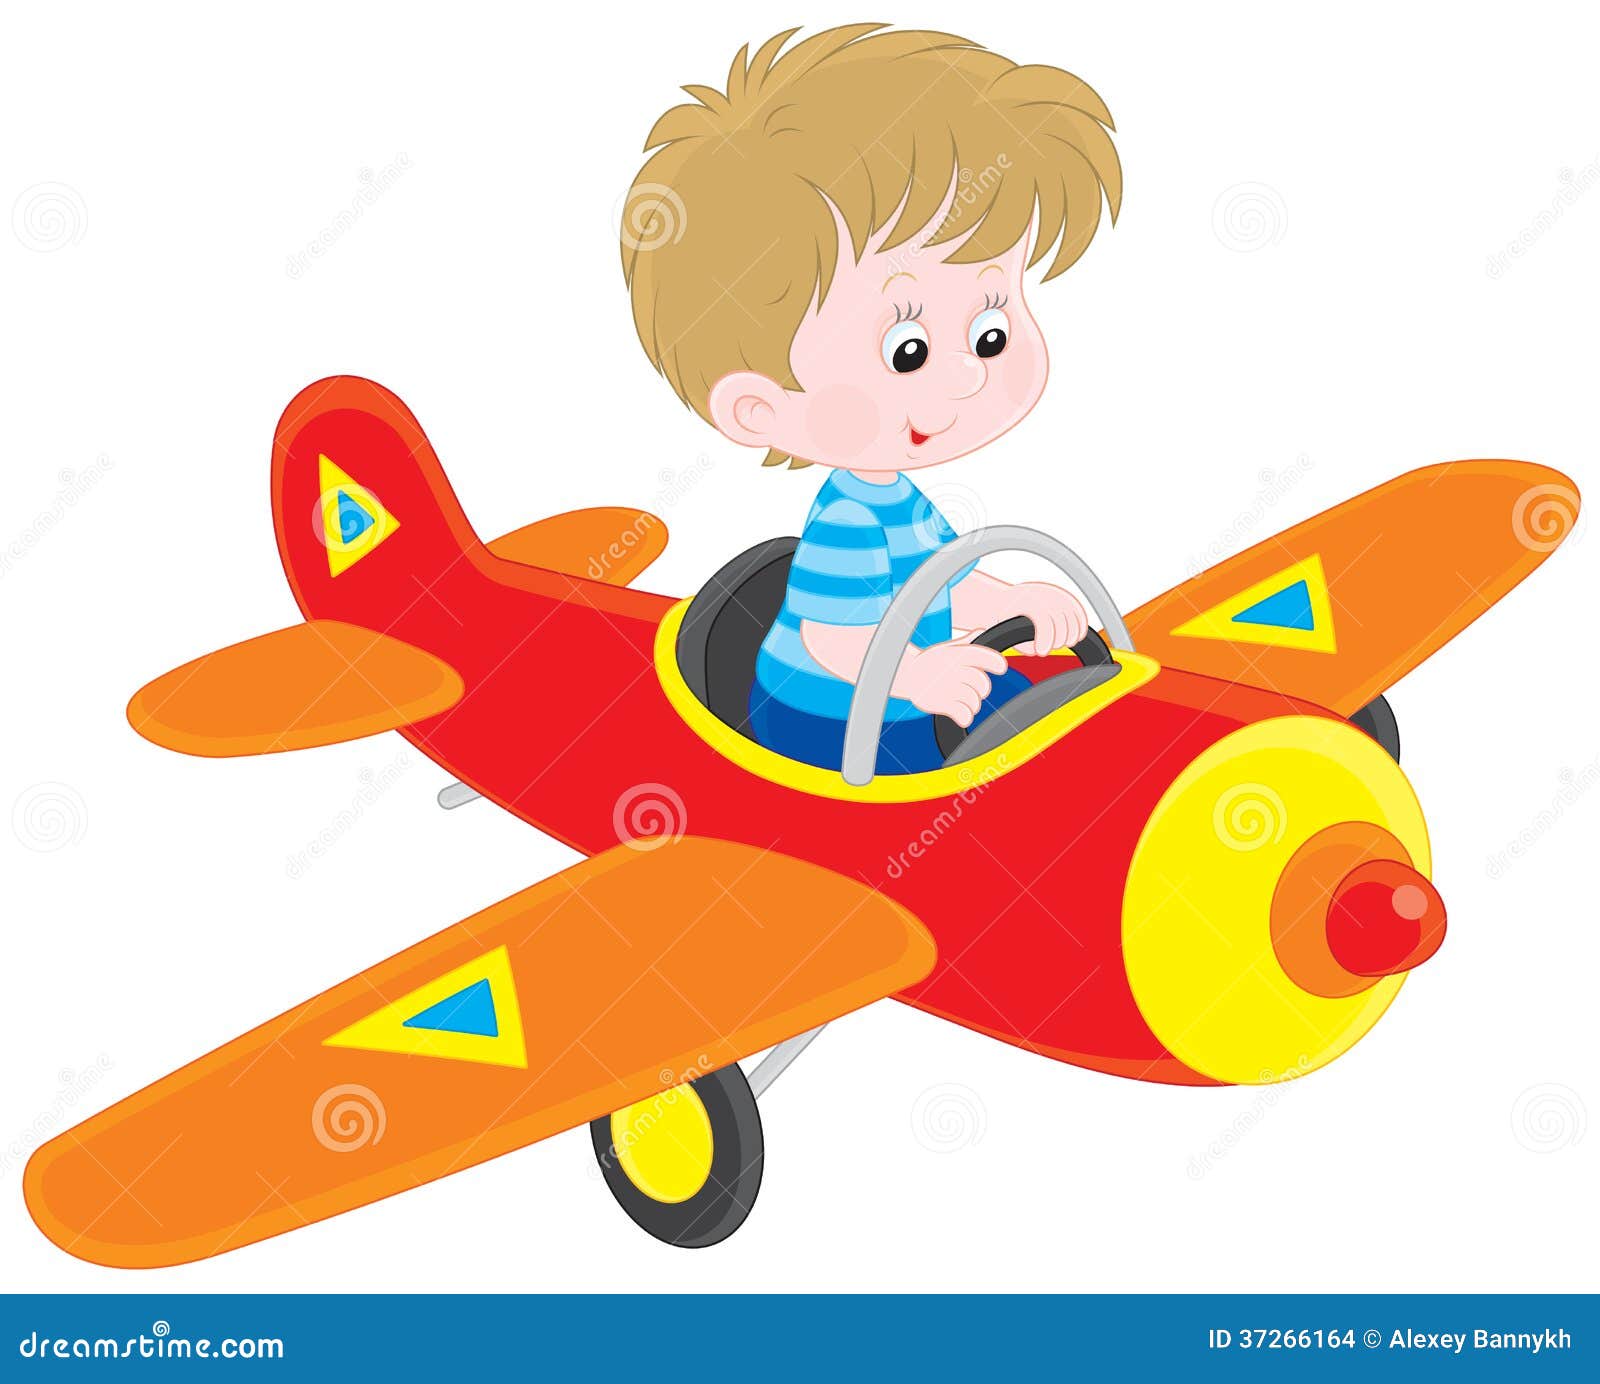 airplane toy clipart - photo #18